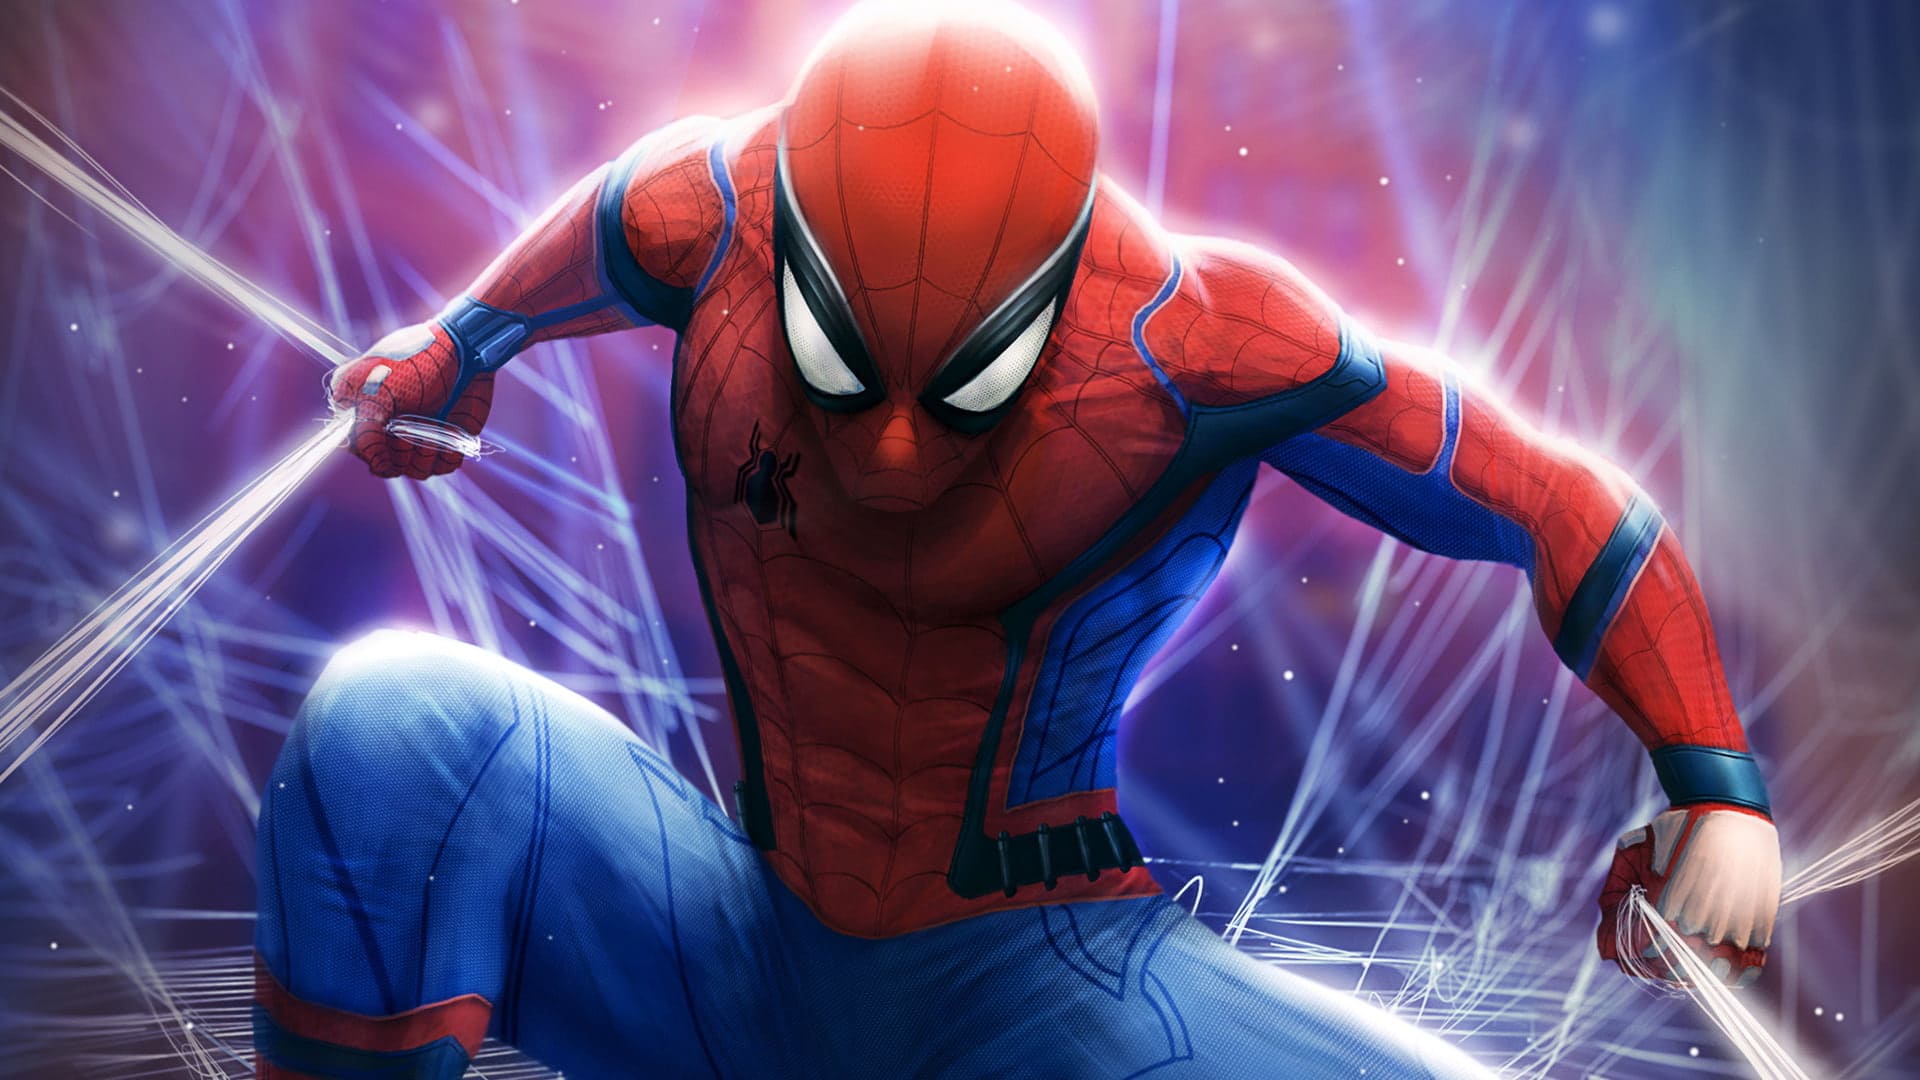 Celebrating the Web-Slinger: The Best Spider-Man iPhone Wallpapers